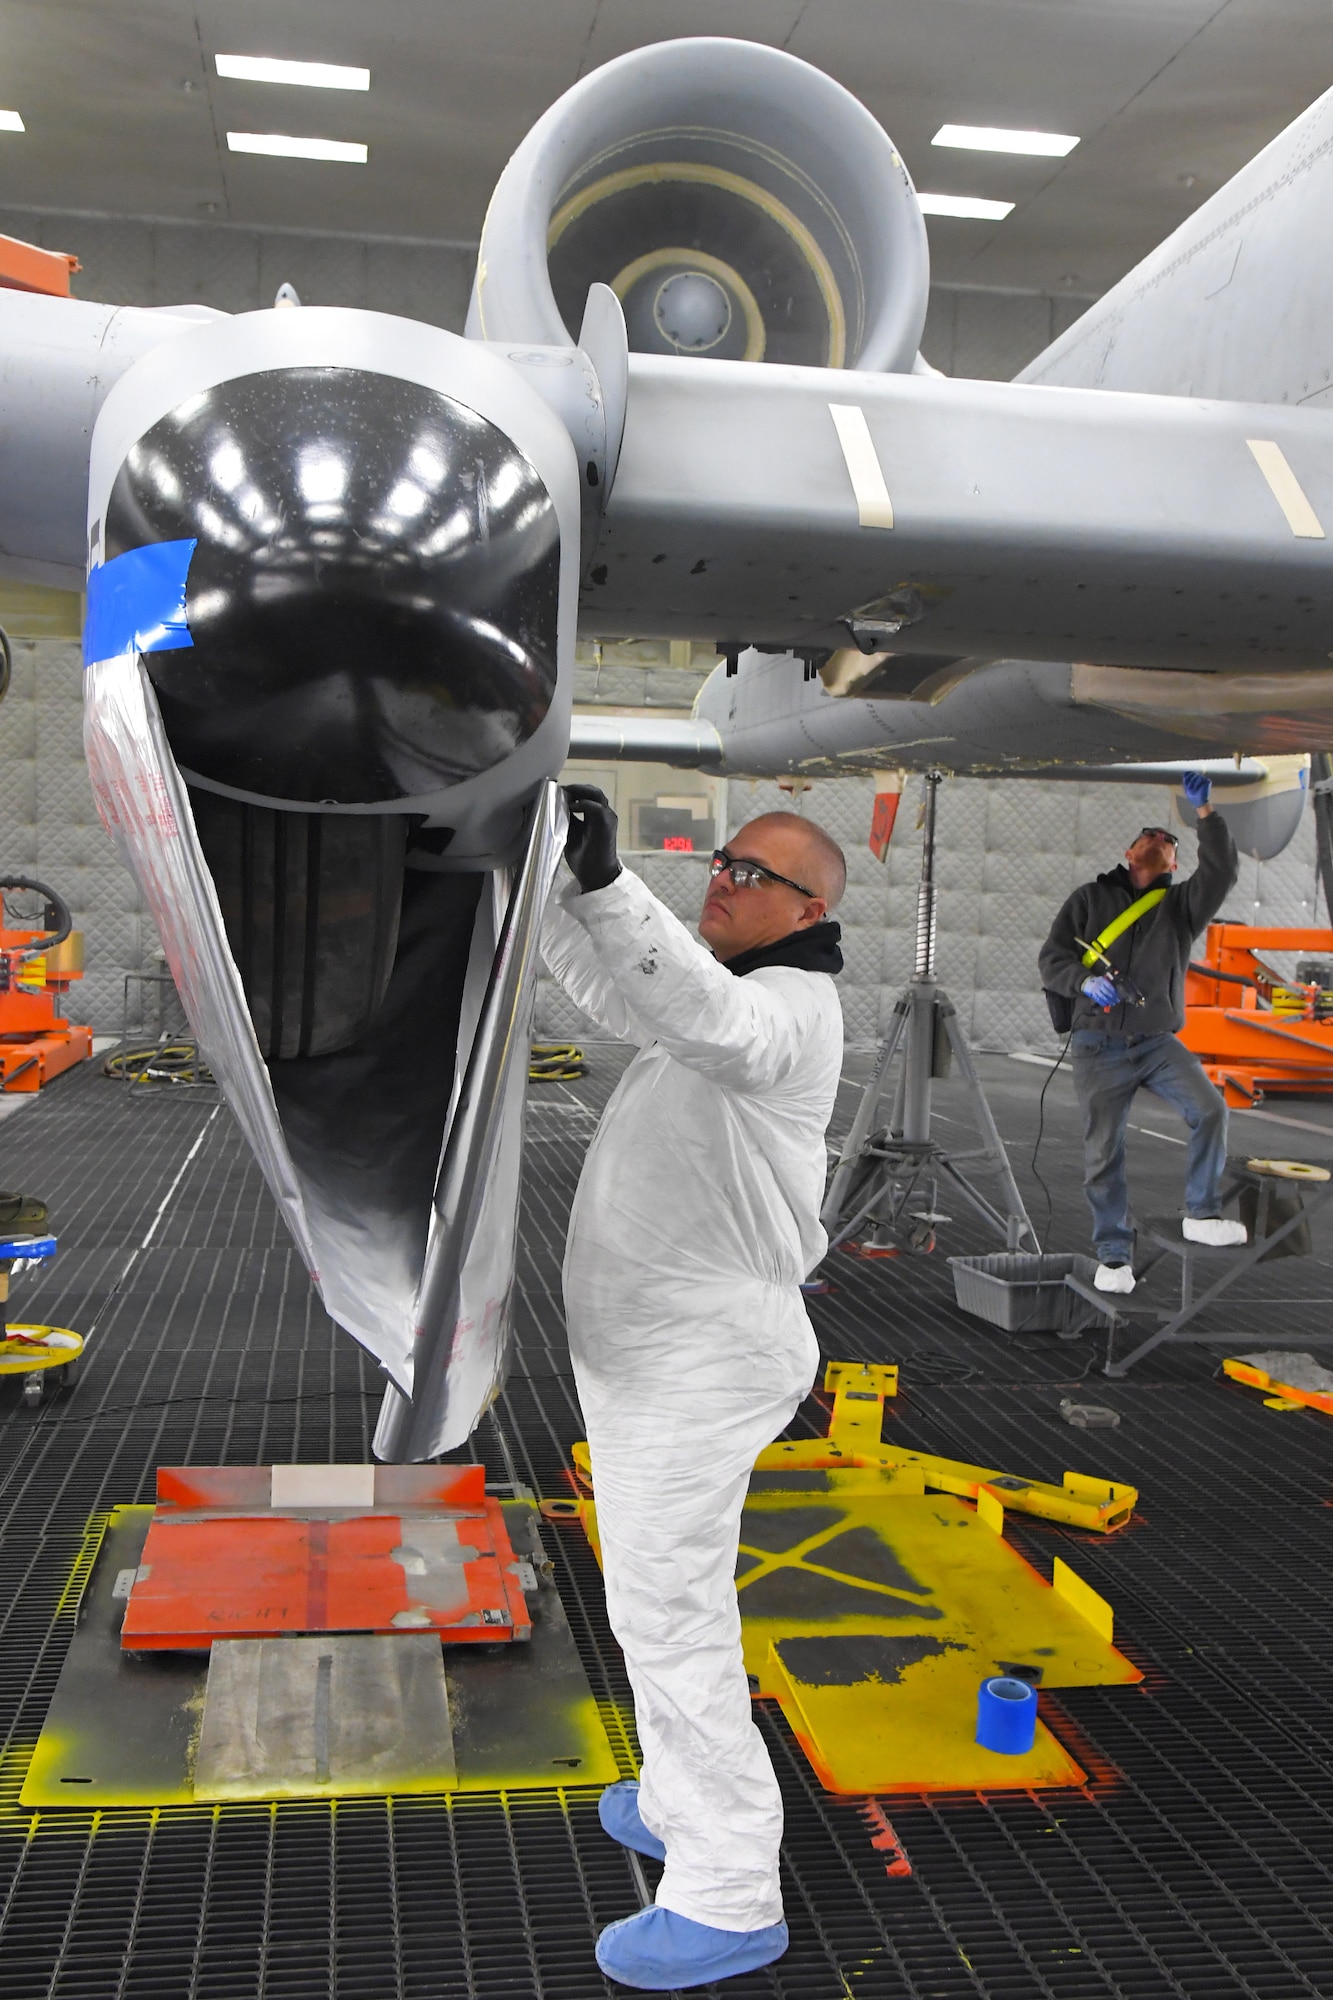 A technician is using a placing a cover on part of the wing of an A-10 aircraft located inside a lighted depaint facility.